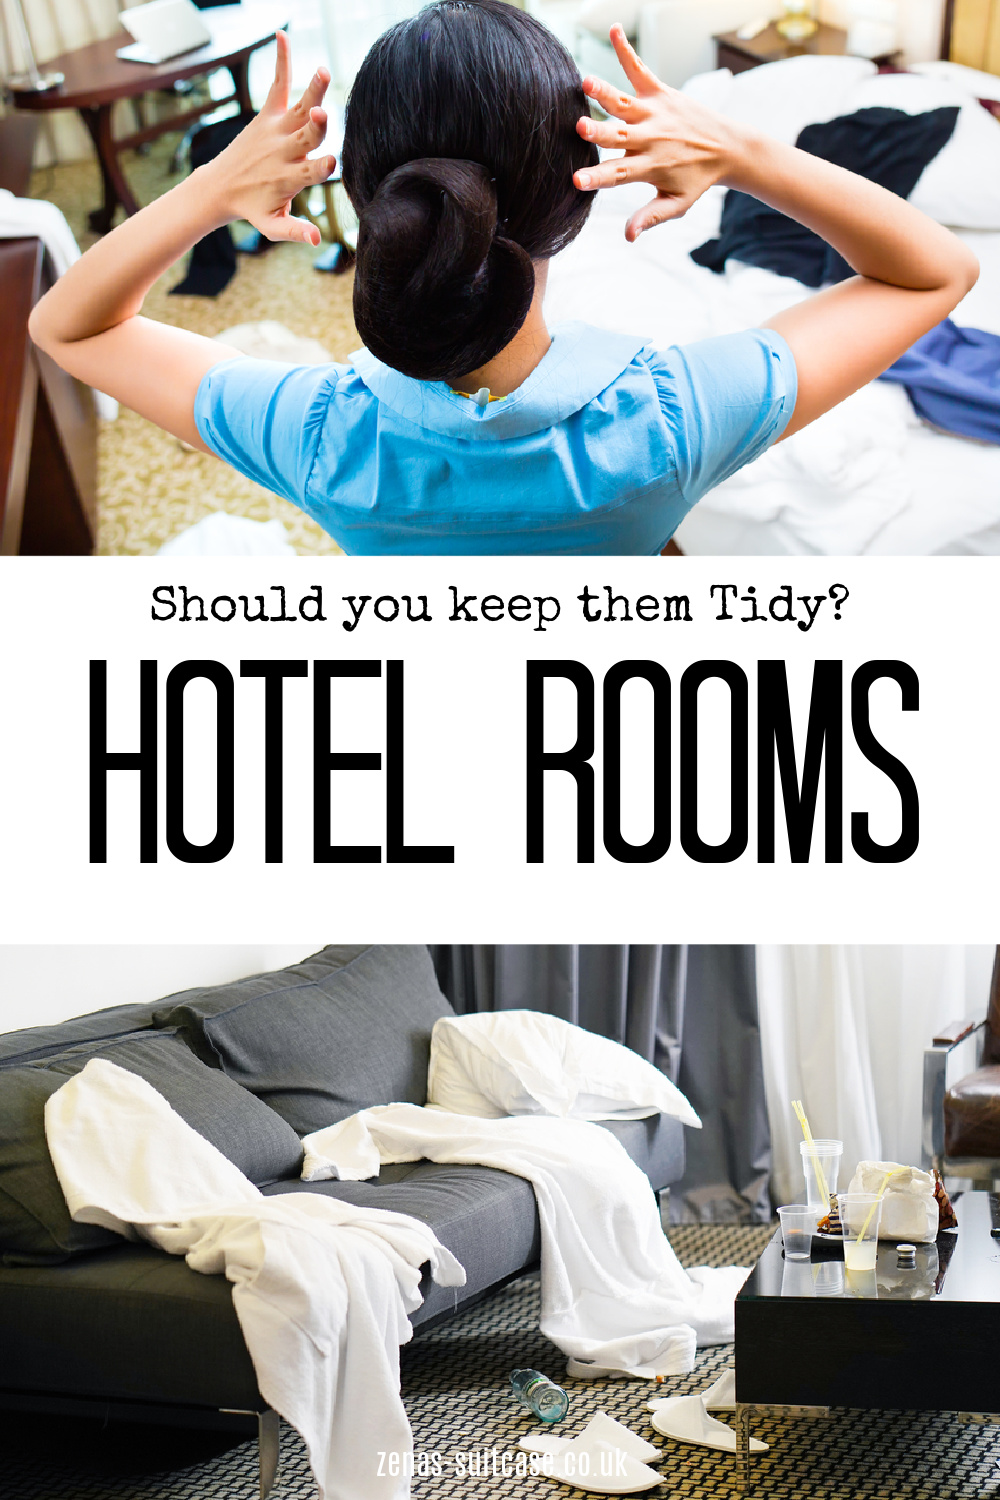 Hotel rooms - Should you keep them tidy?